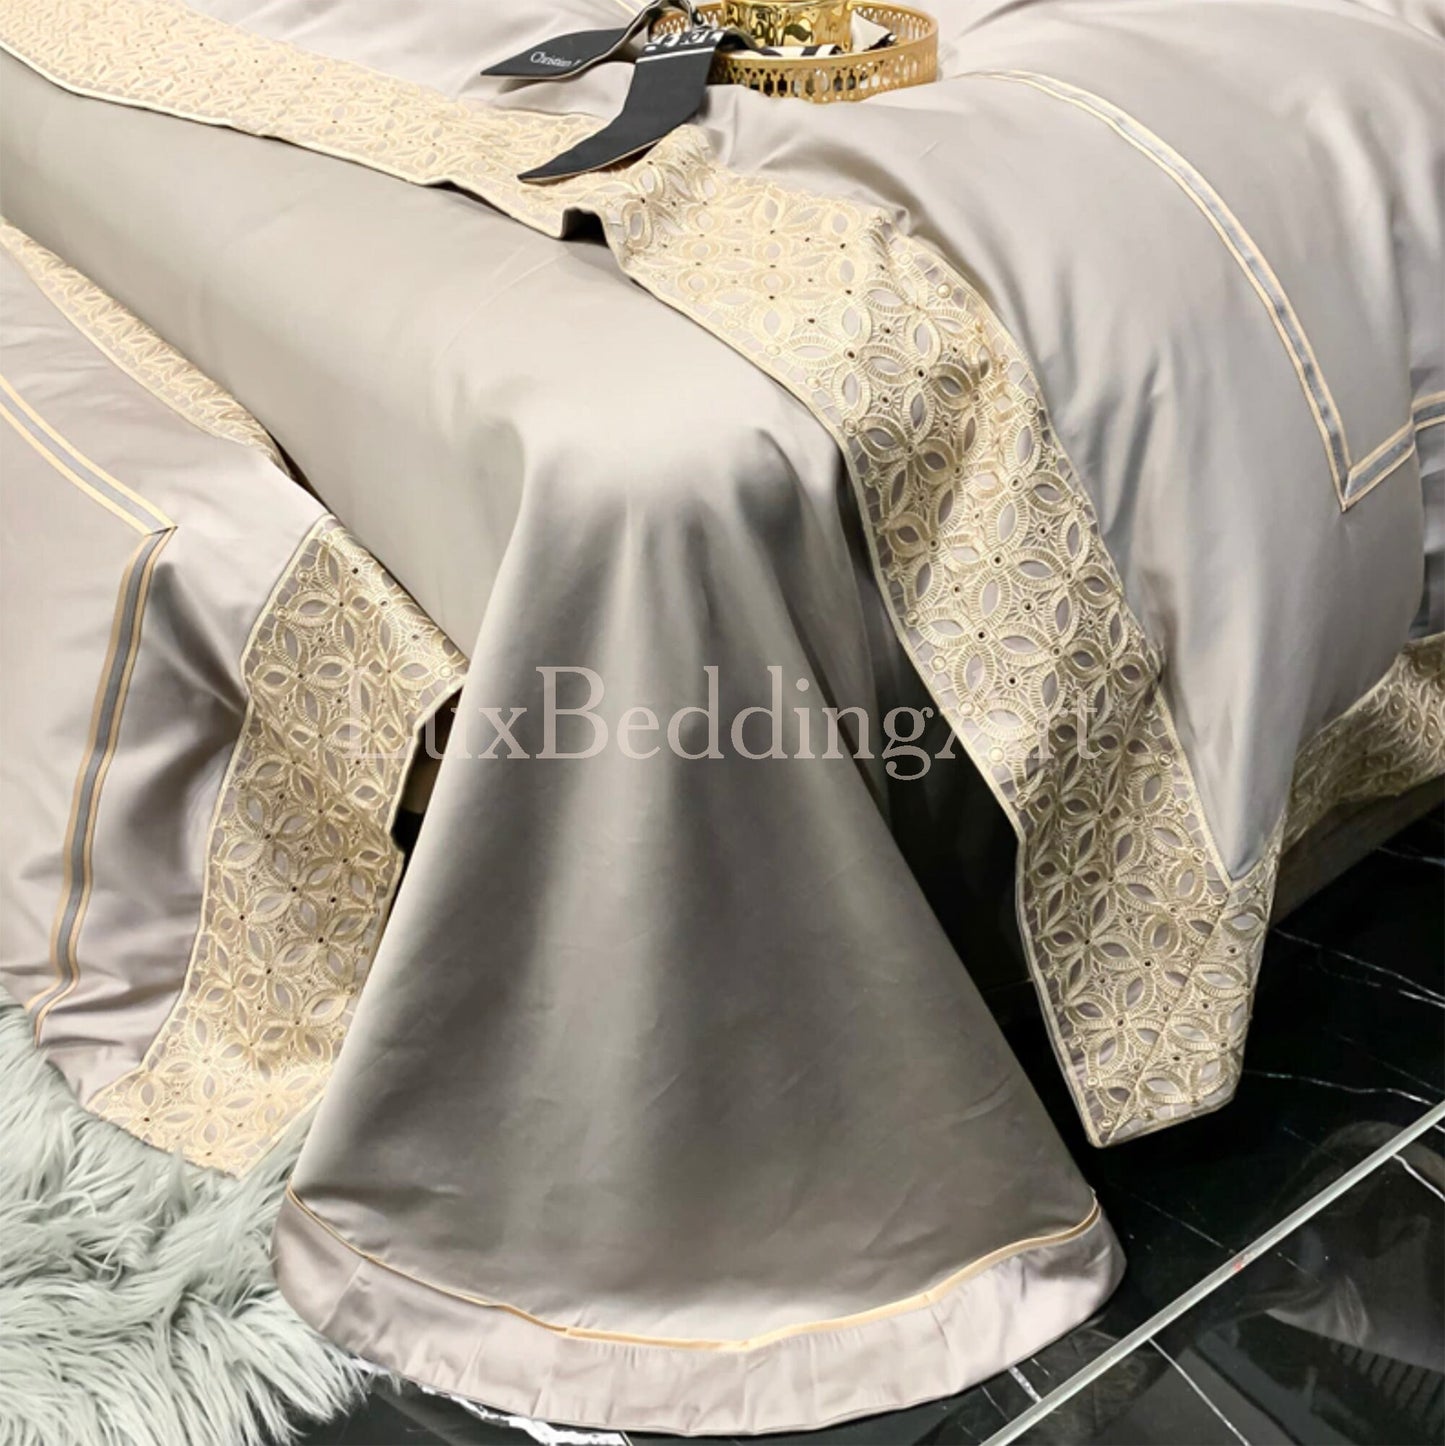 Luxury Elegant Beige&Gold Egyptian Cotton Bedding Set with Gold Edge Embroidery • Duvet Cover Set • Bed Sheet • Pillowcases